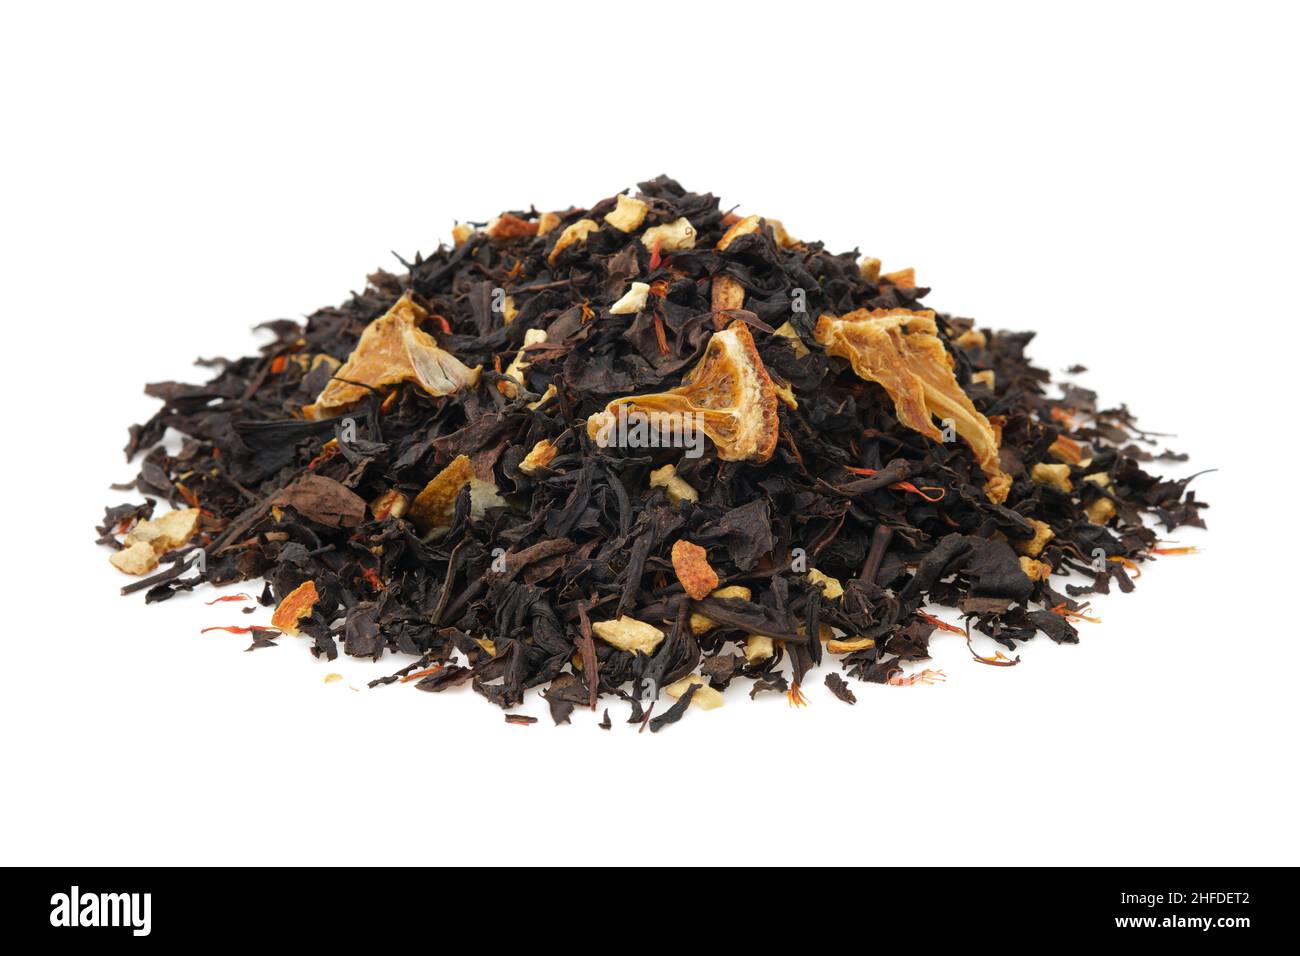 Pile of dry black tea leaves on white. Heap of aromatic black tea leaves with dried citrus slices and peel. Stock Photo